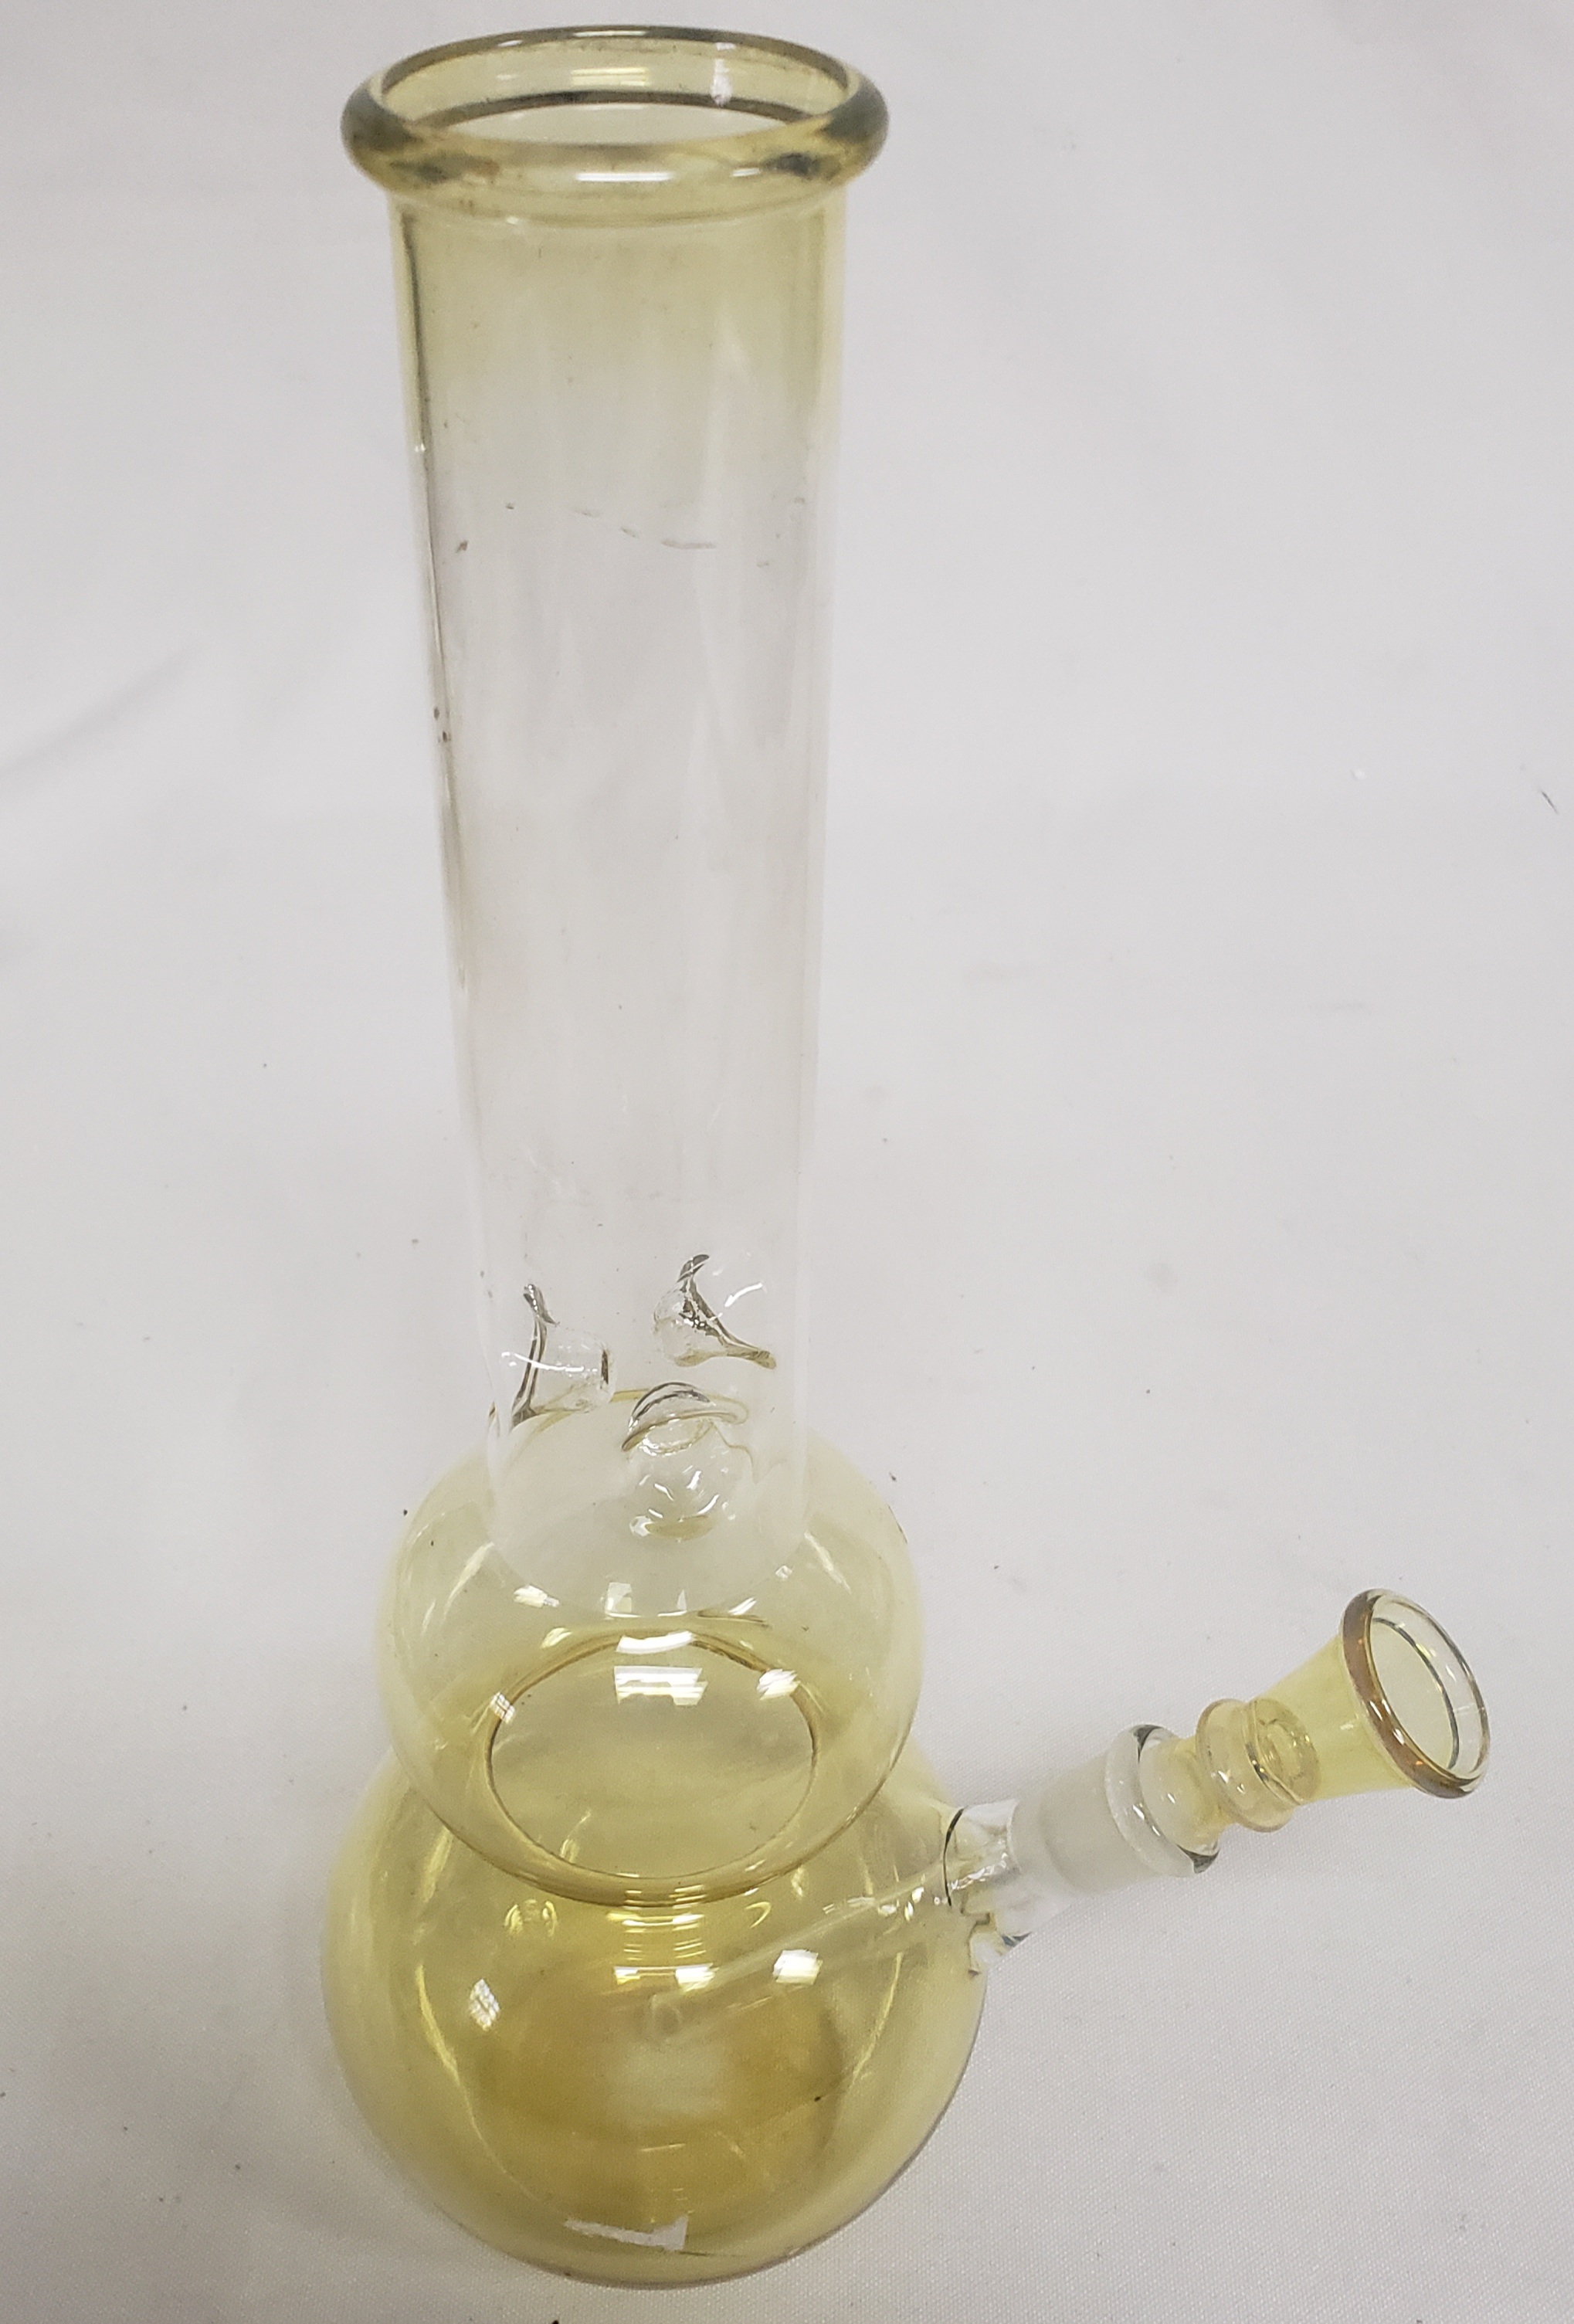 12" Light Yellow WP with Ice Catcher Buy 1 Get 1 FREE #CL10